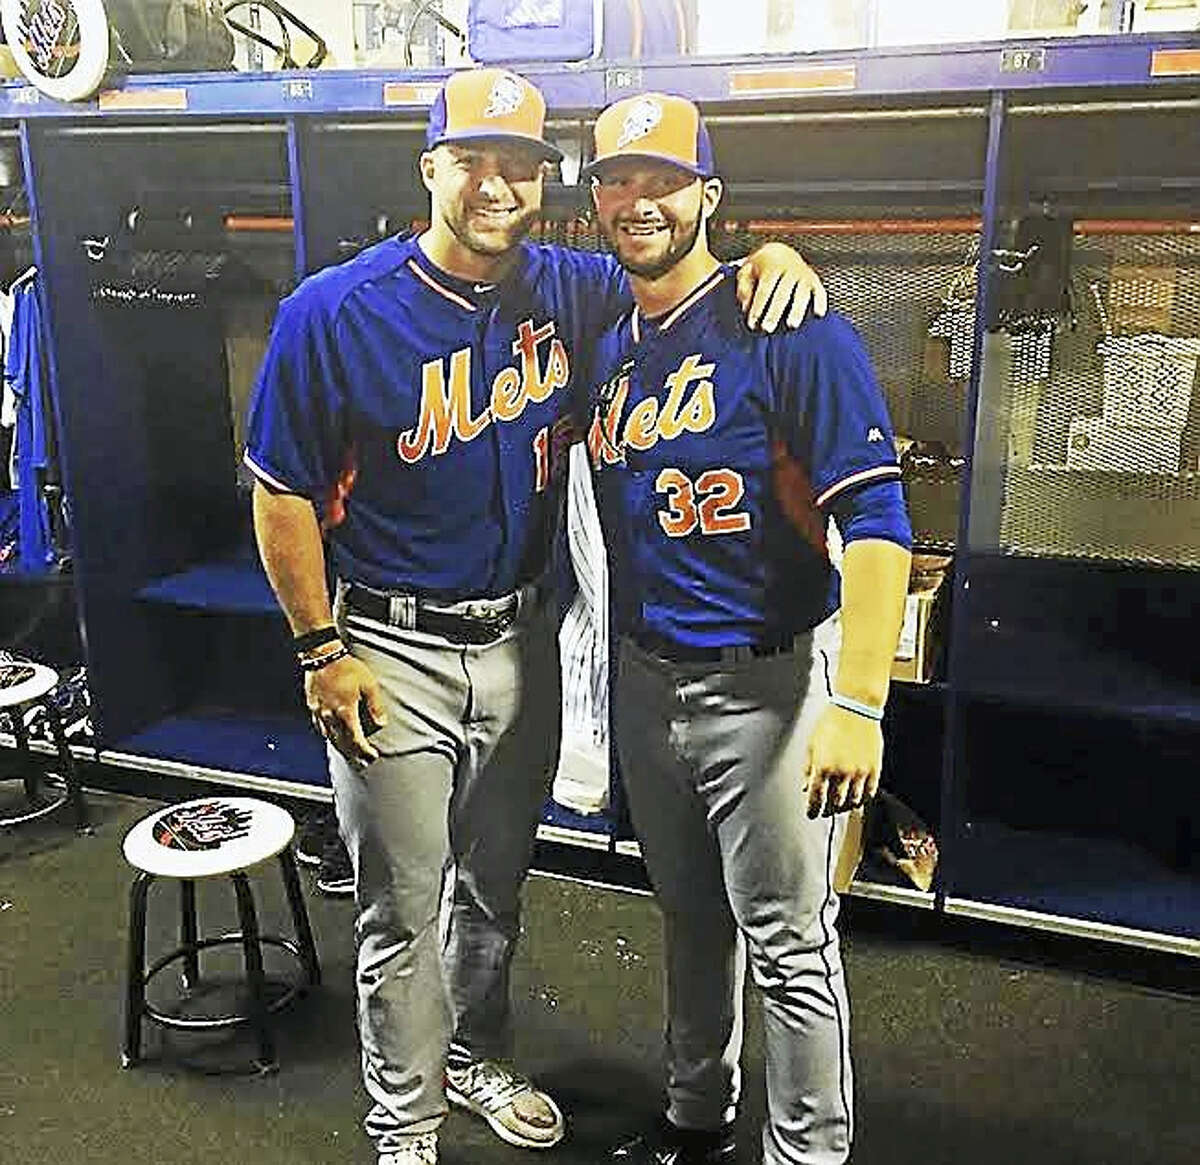 Milford’s Joe Zanghi, right, poses with former NFL quarterback and Zanghi’s current minor-league baseball teammate Tim Tebow inside the Columbia Fireflies’ clubhouse.